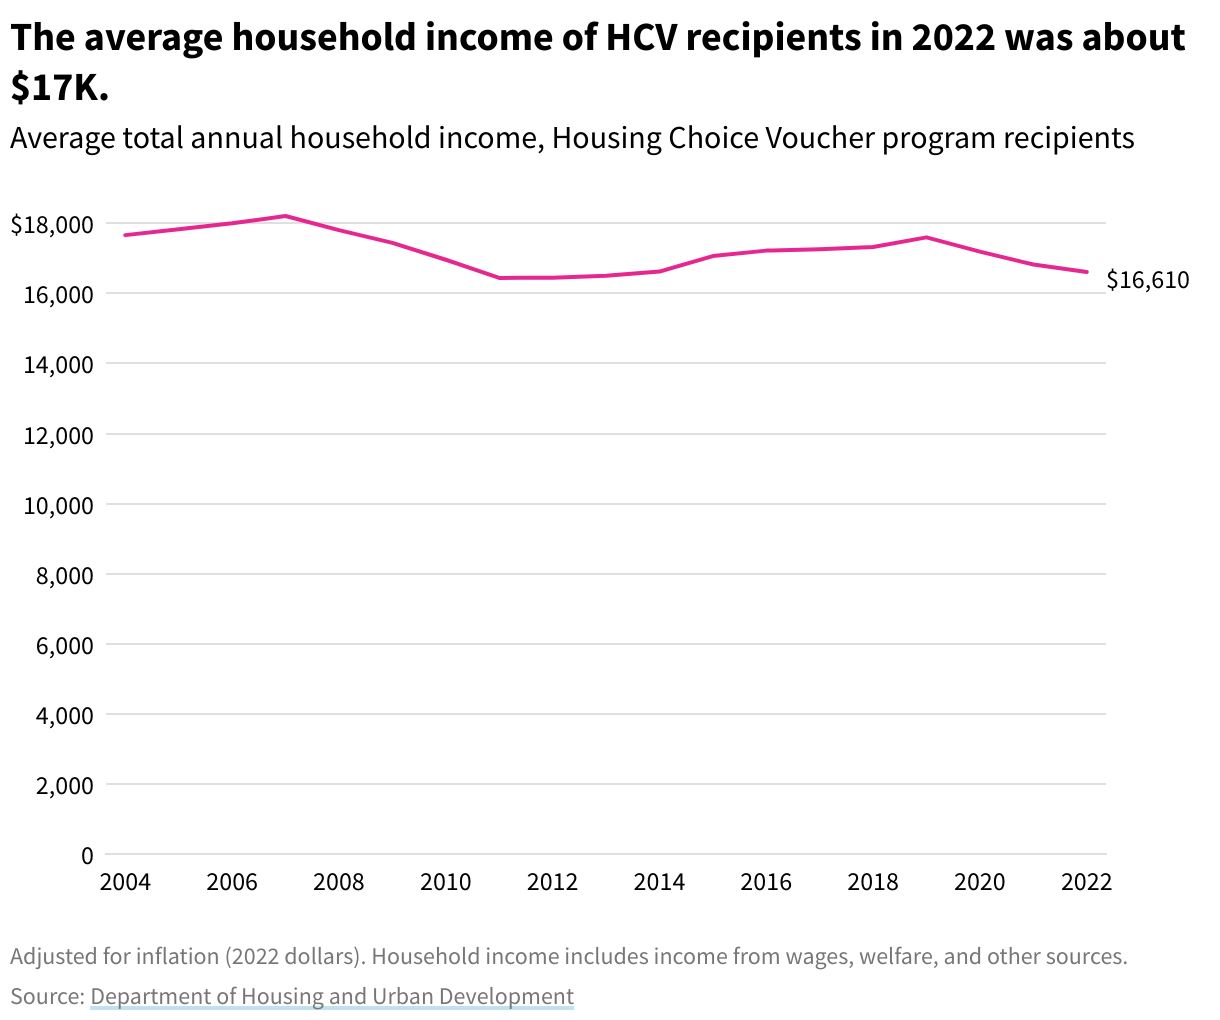 Line chart showing average total annual household income of Housing Choice Voucher program recipients. In 2022, the figure is $16,610.